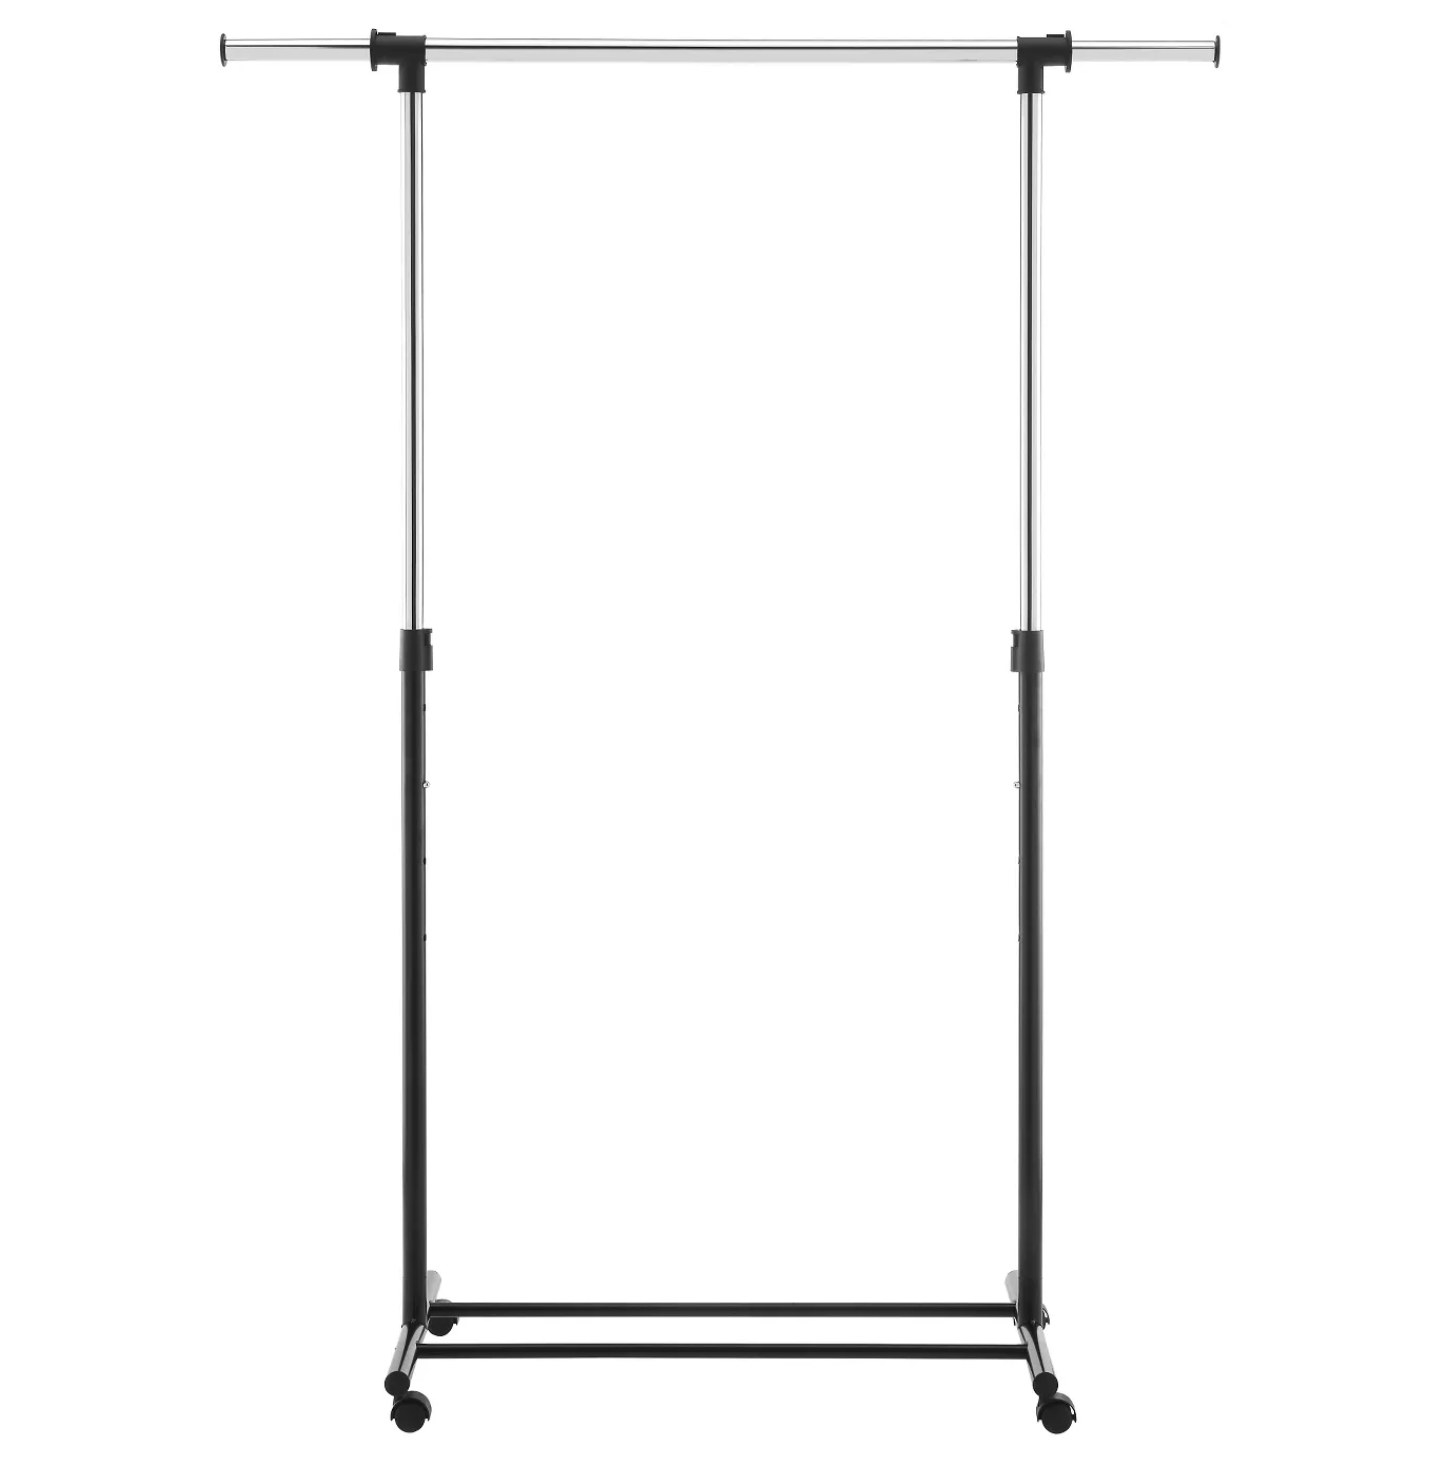 A black-and-steel, adjustable garment rack with caster wheels.